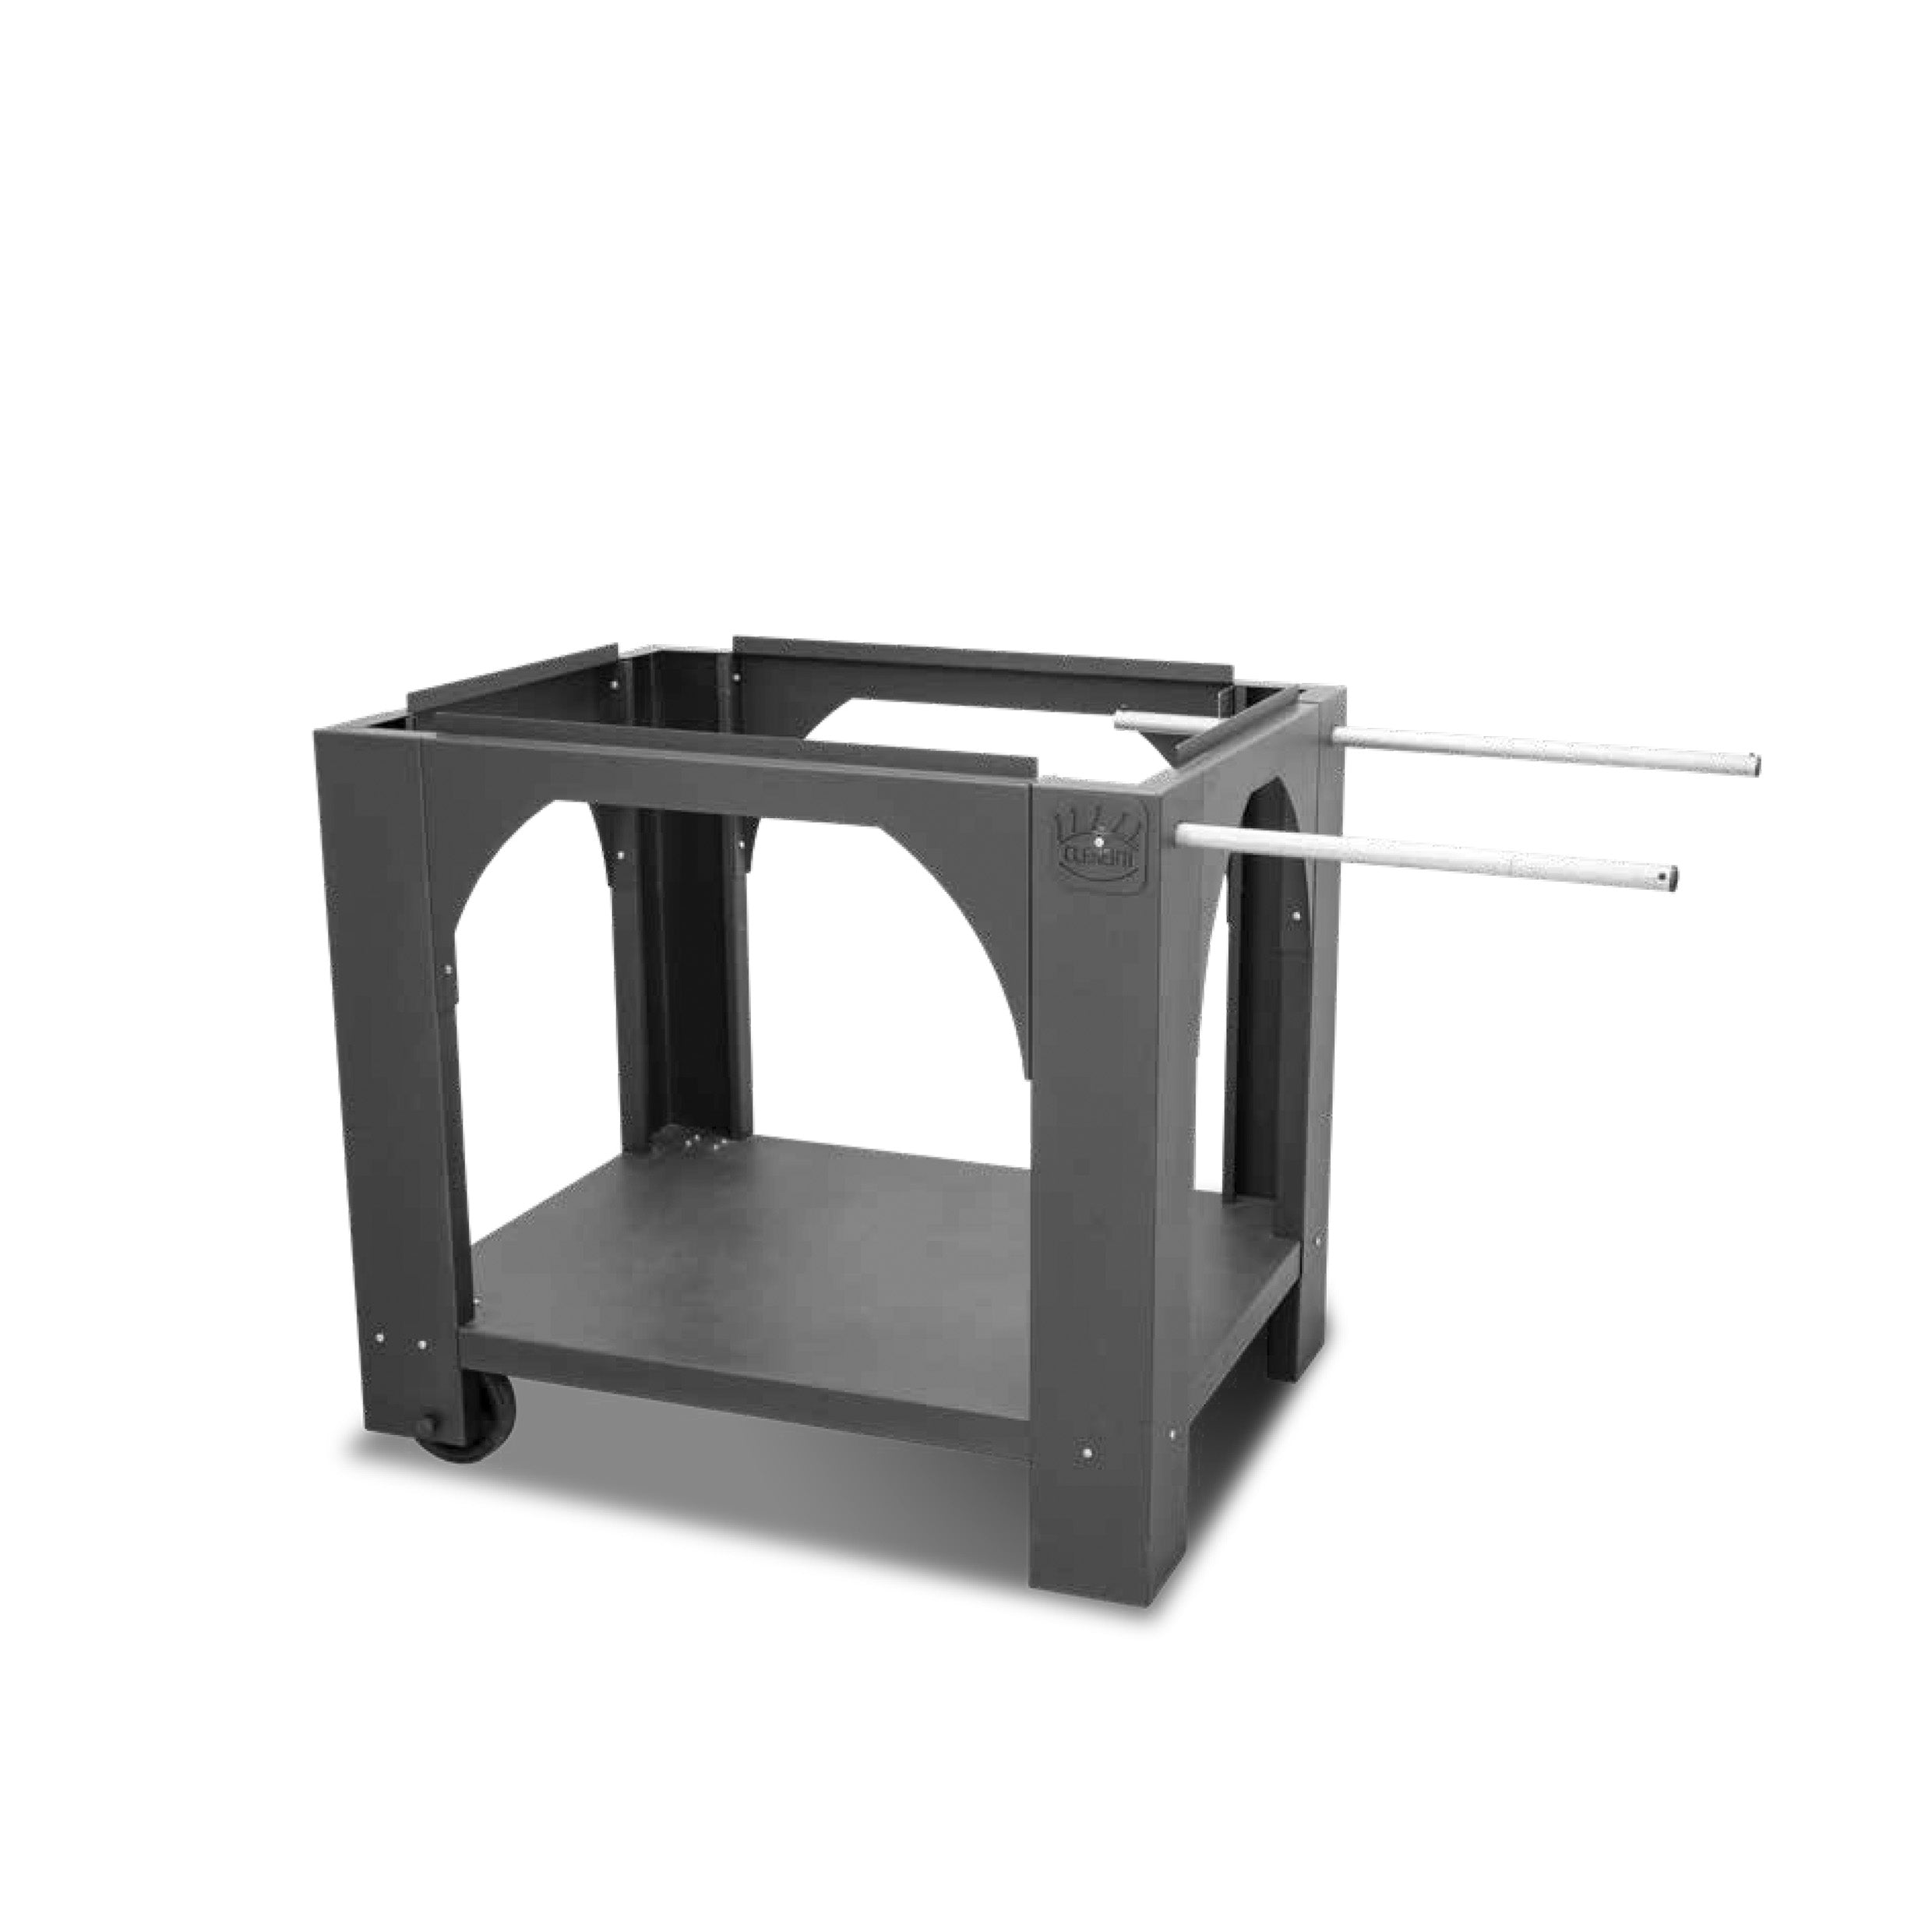 oven stand